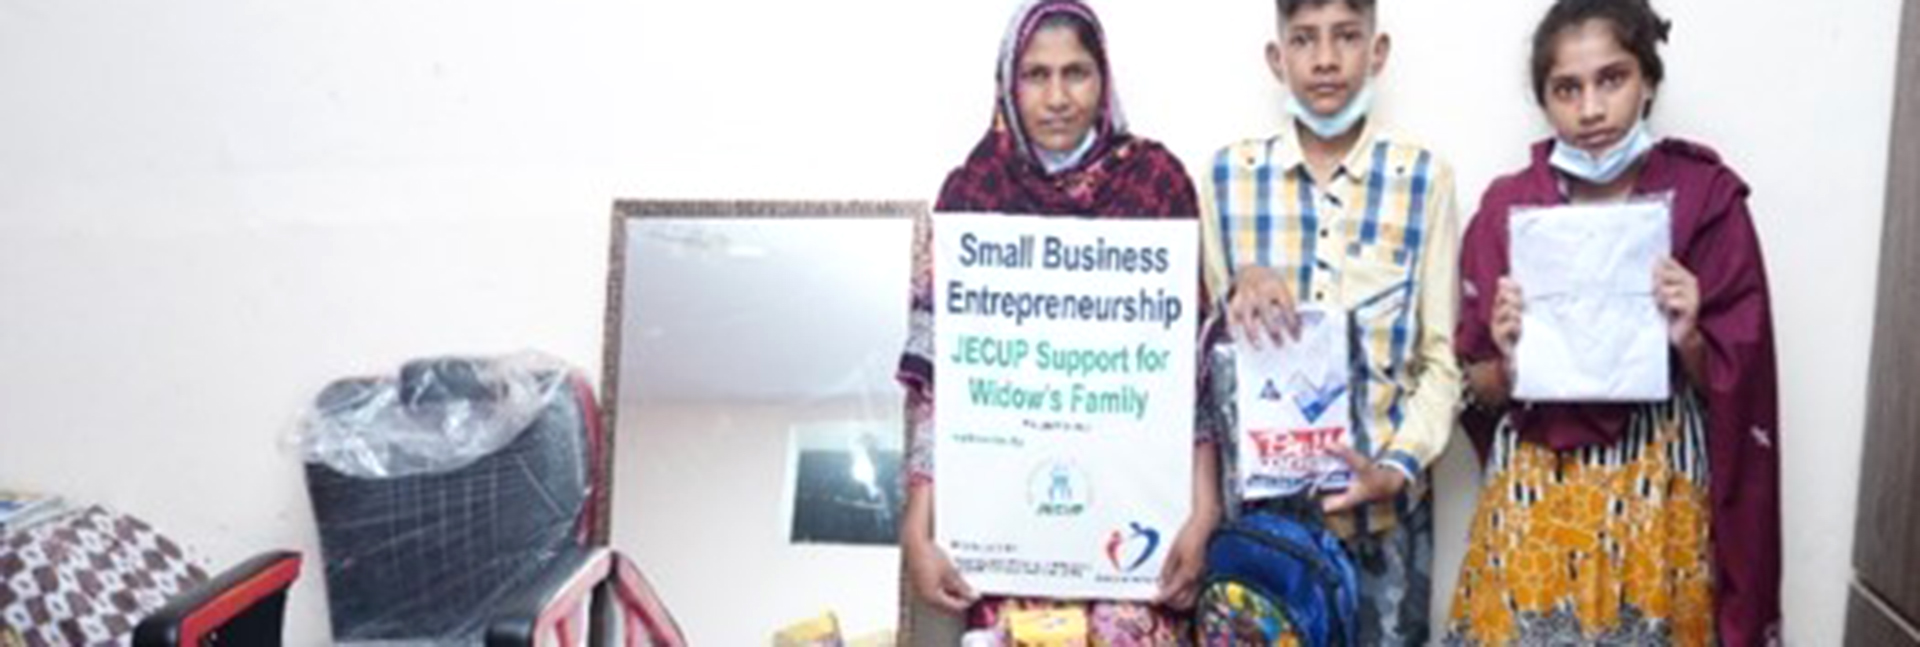 Widows Small Business Support